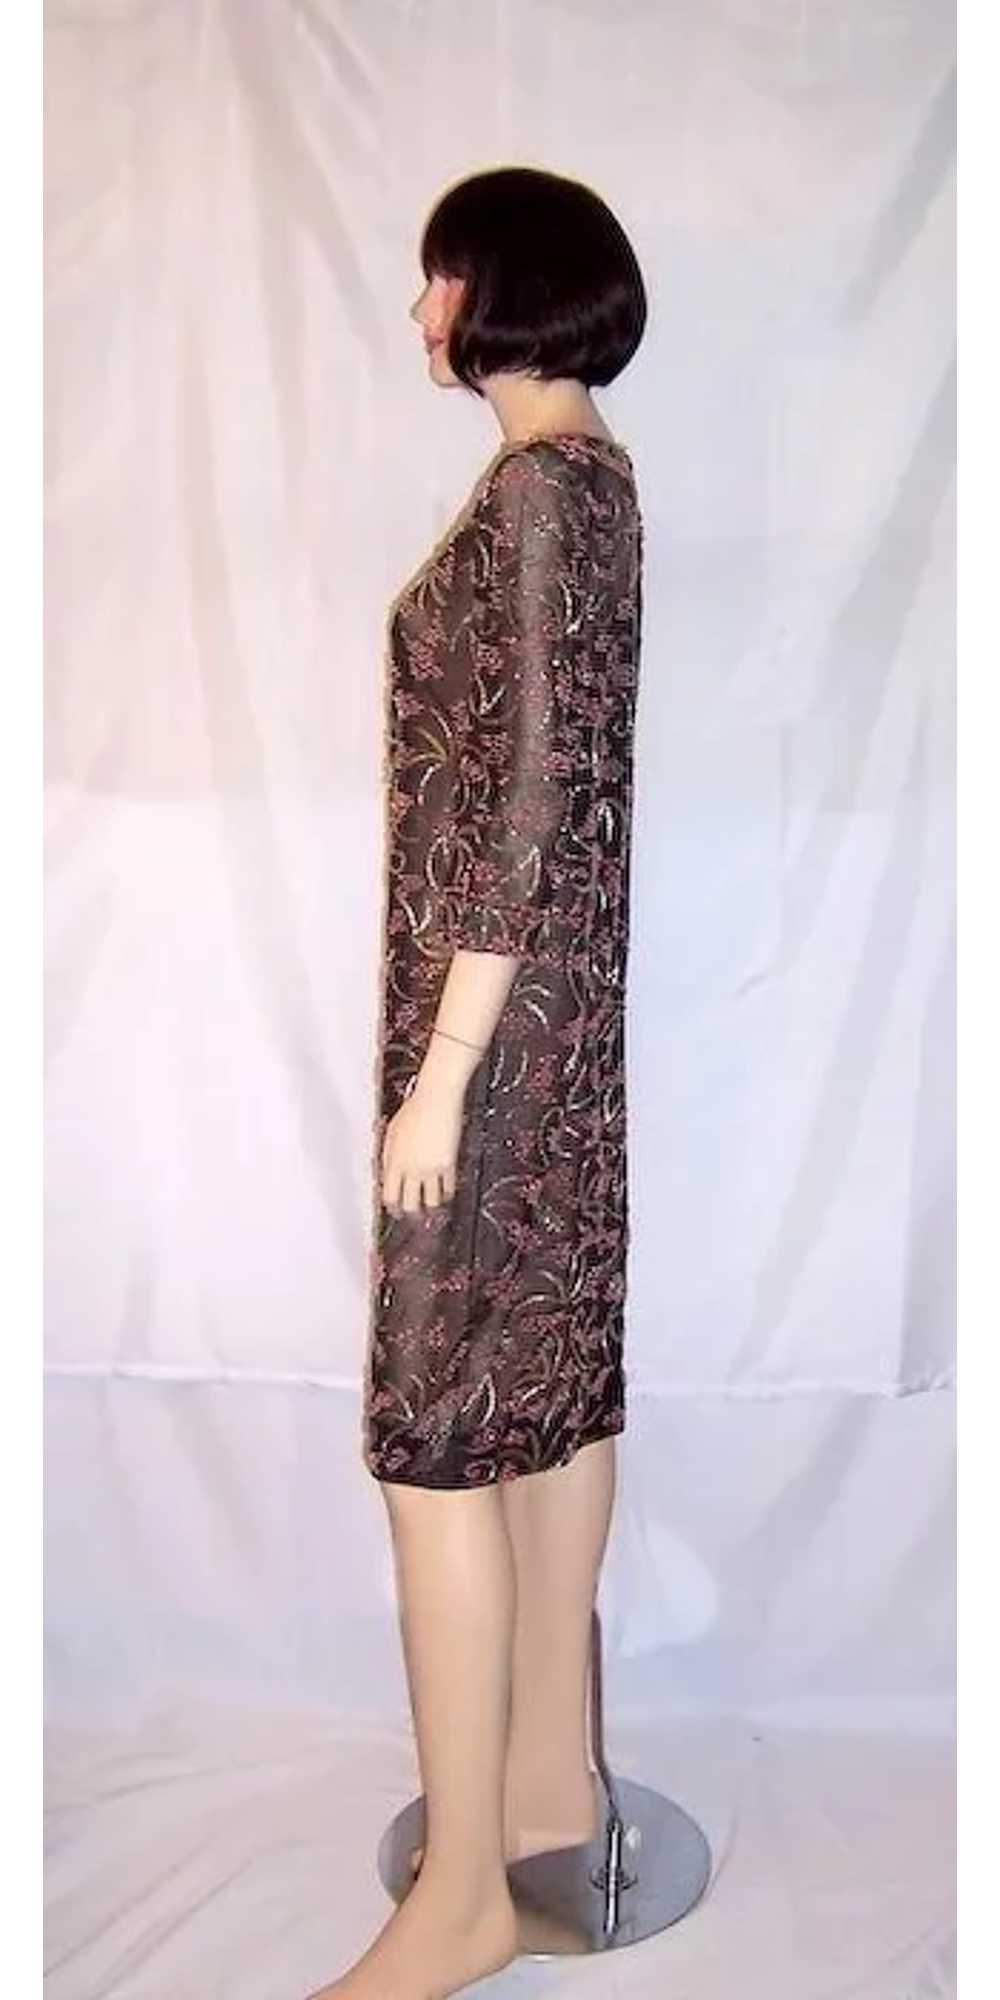 1960's Pink and Silver Beaded Dress on Black Net - image 2